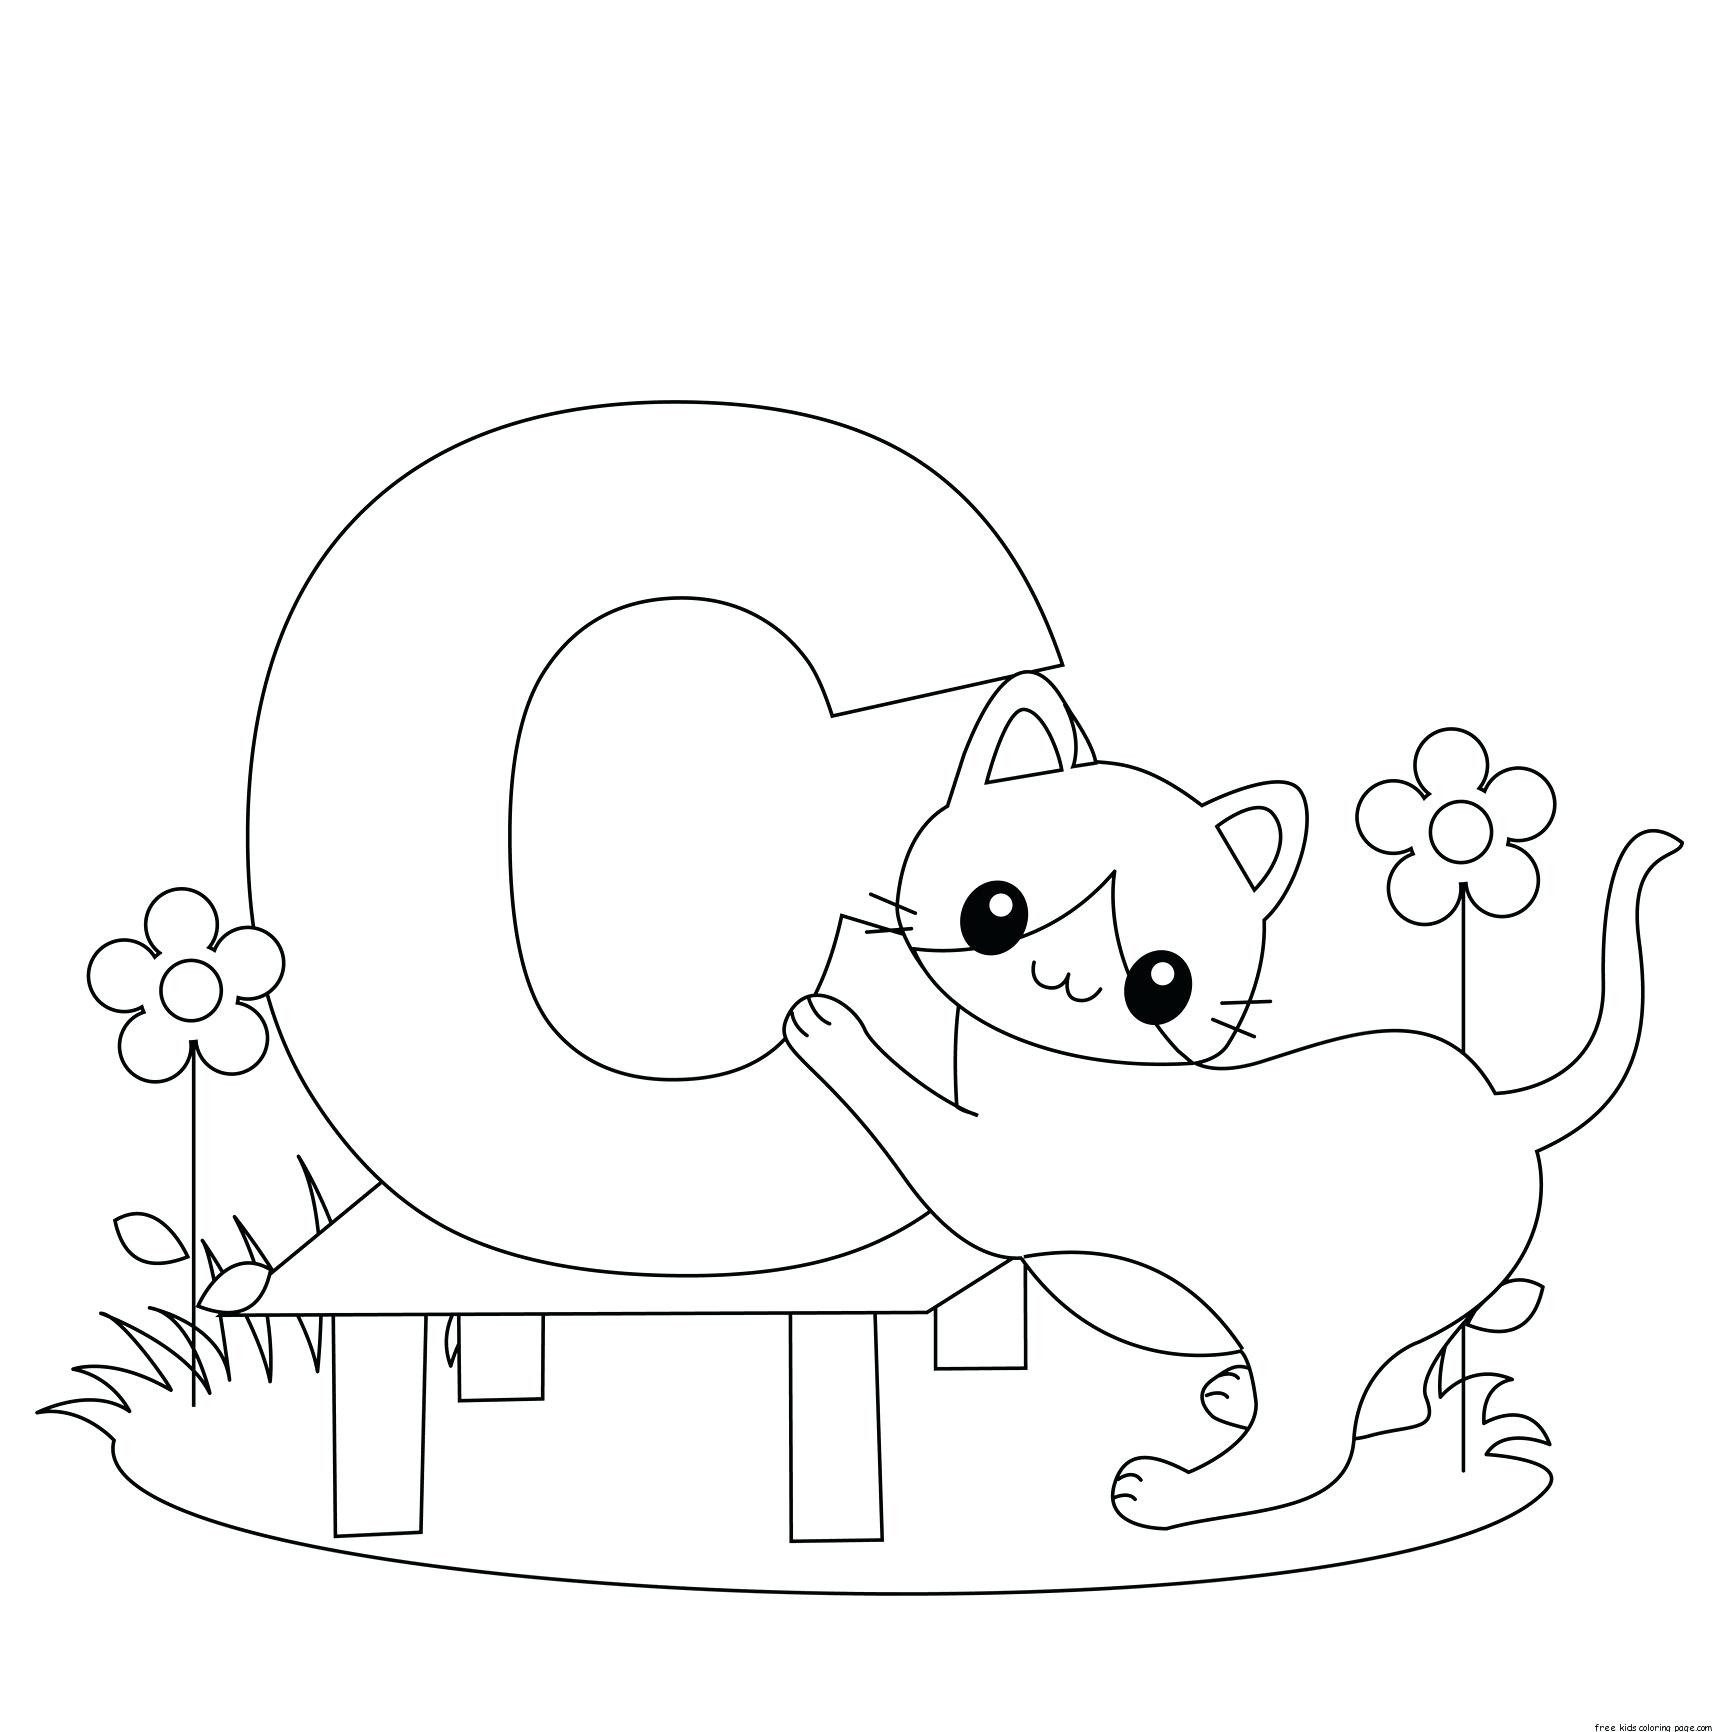 Coloring Pages : Alphabet Coloring Pages For Toddlers throughout Alphabet Coloring Worksheets For Preschoolers